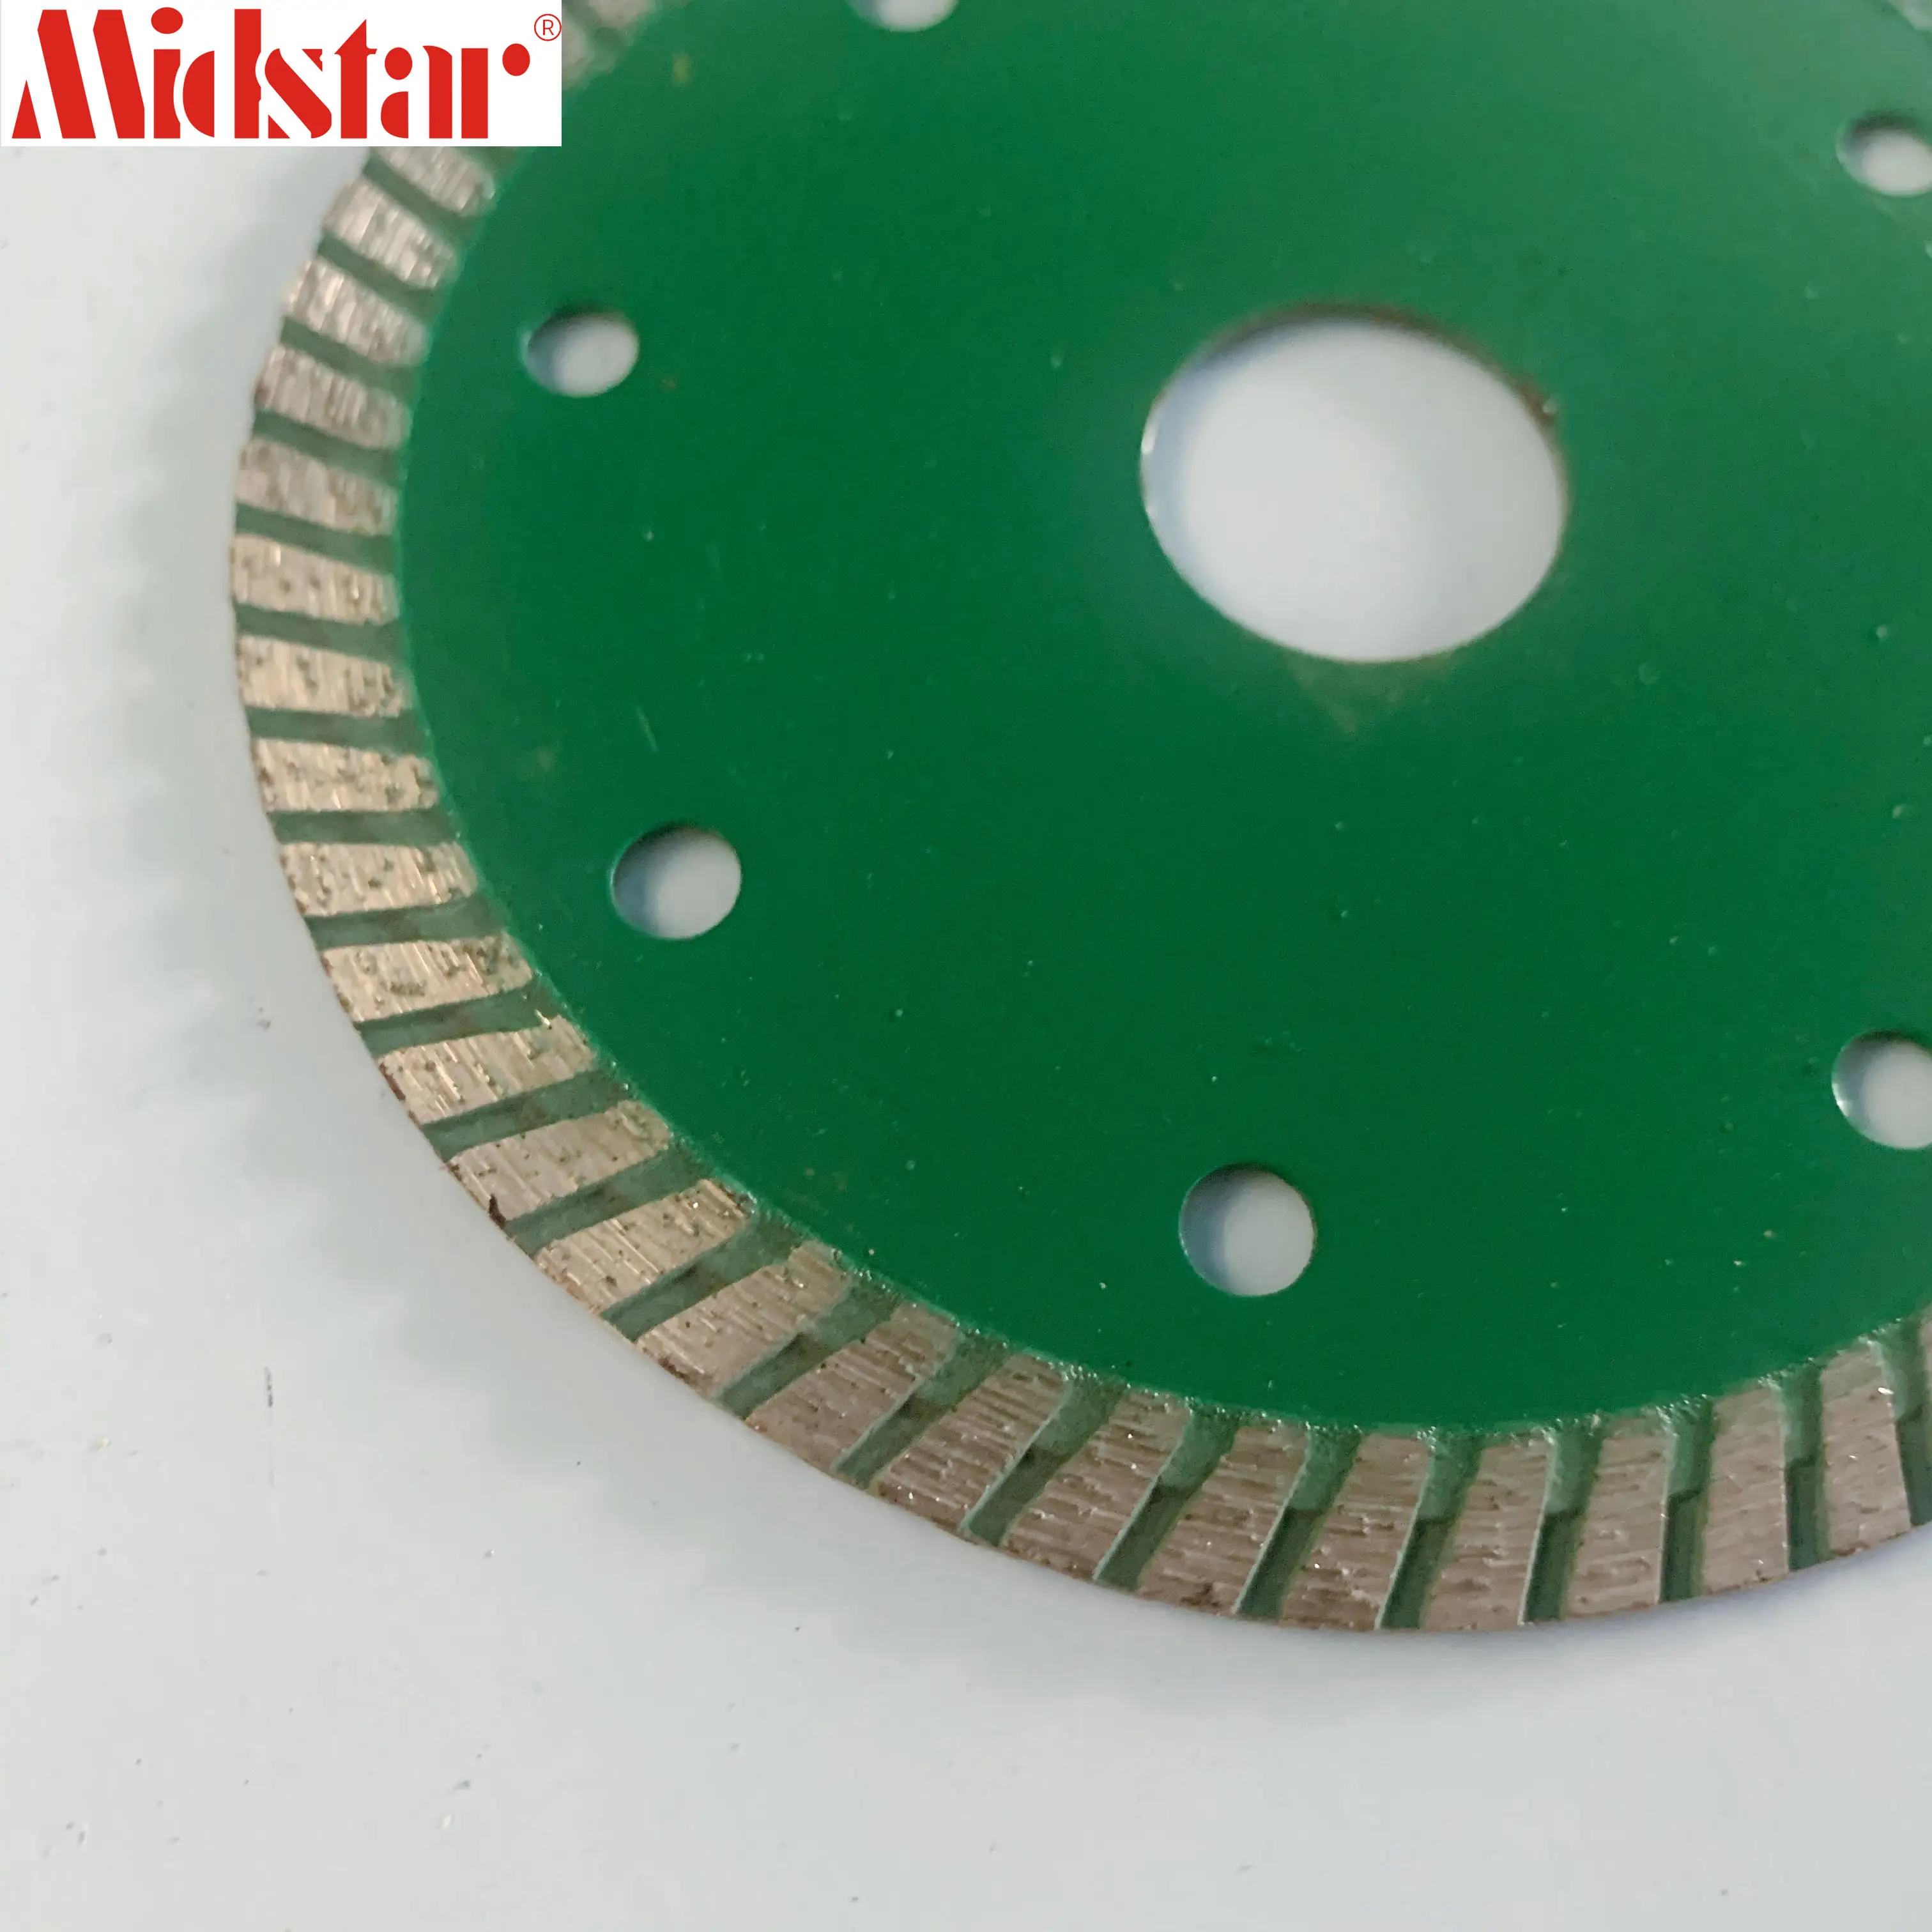 Turbo saw blade  for cutting stone slab,Block,Concrete,Brick,Marble,Granite,Tile,and other materials 4inch